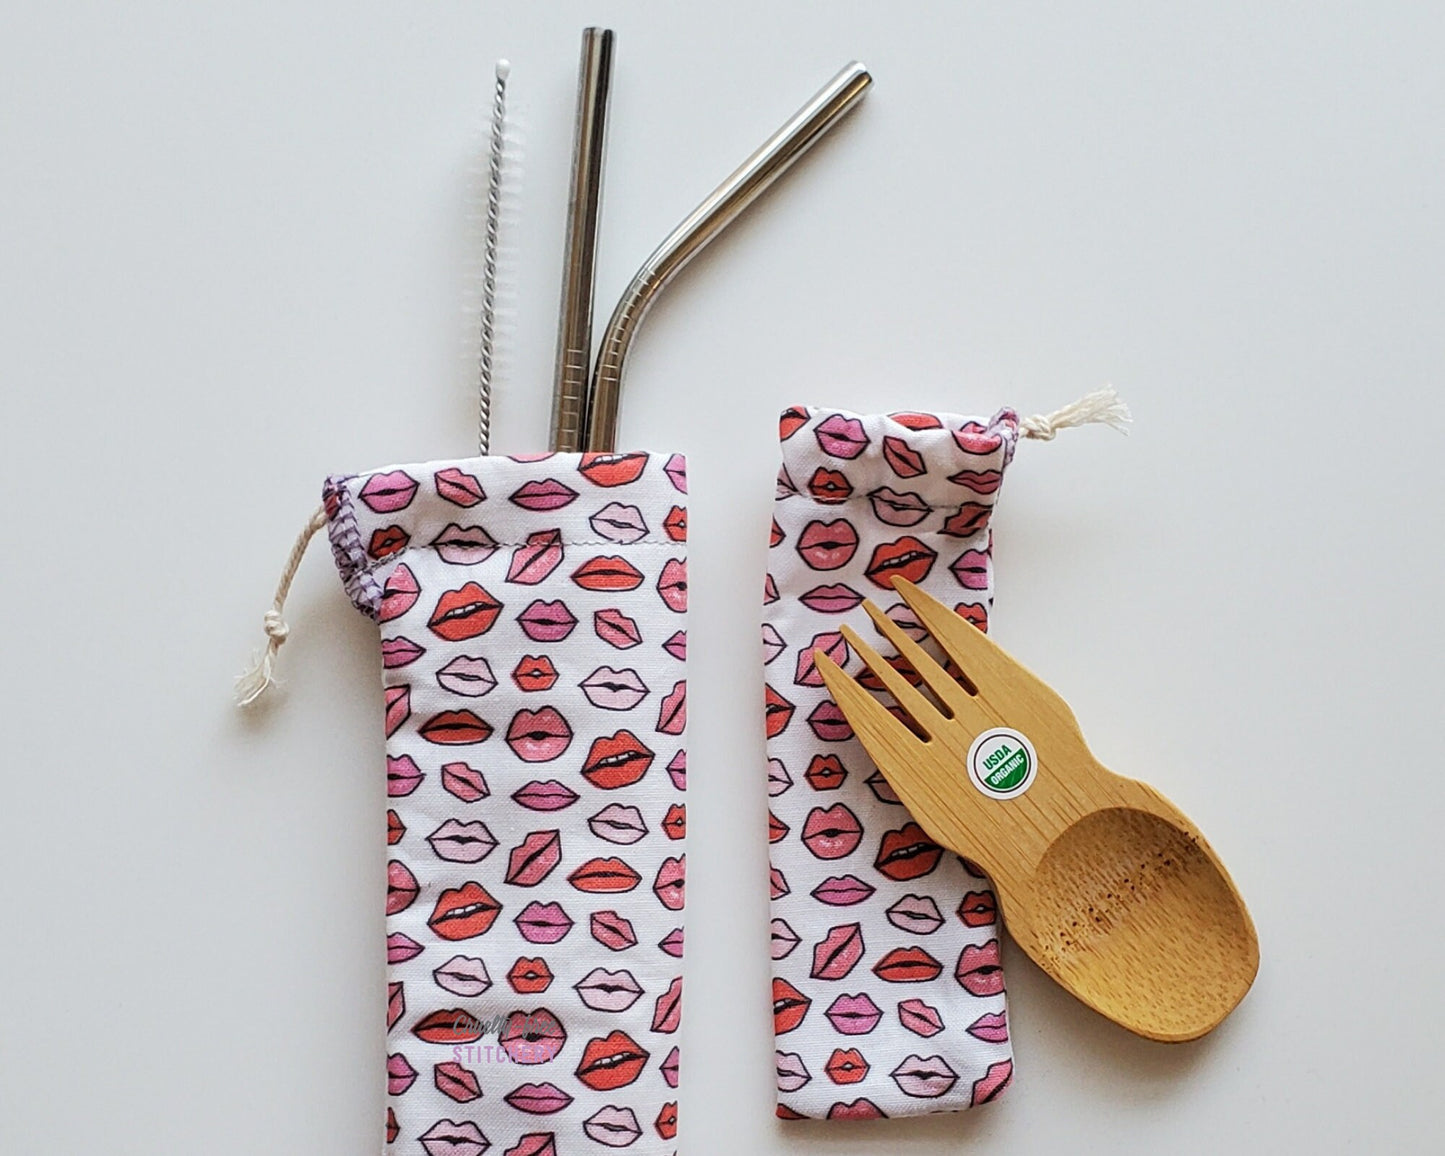 Reusable bamboo spork and stainless steel straw pouch set. The pouches are both white with tiny lips in varying shades of pink.